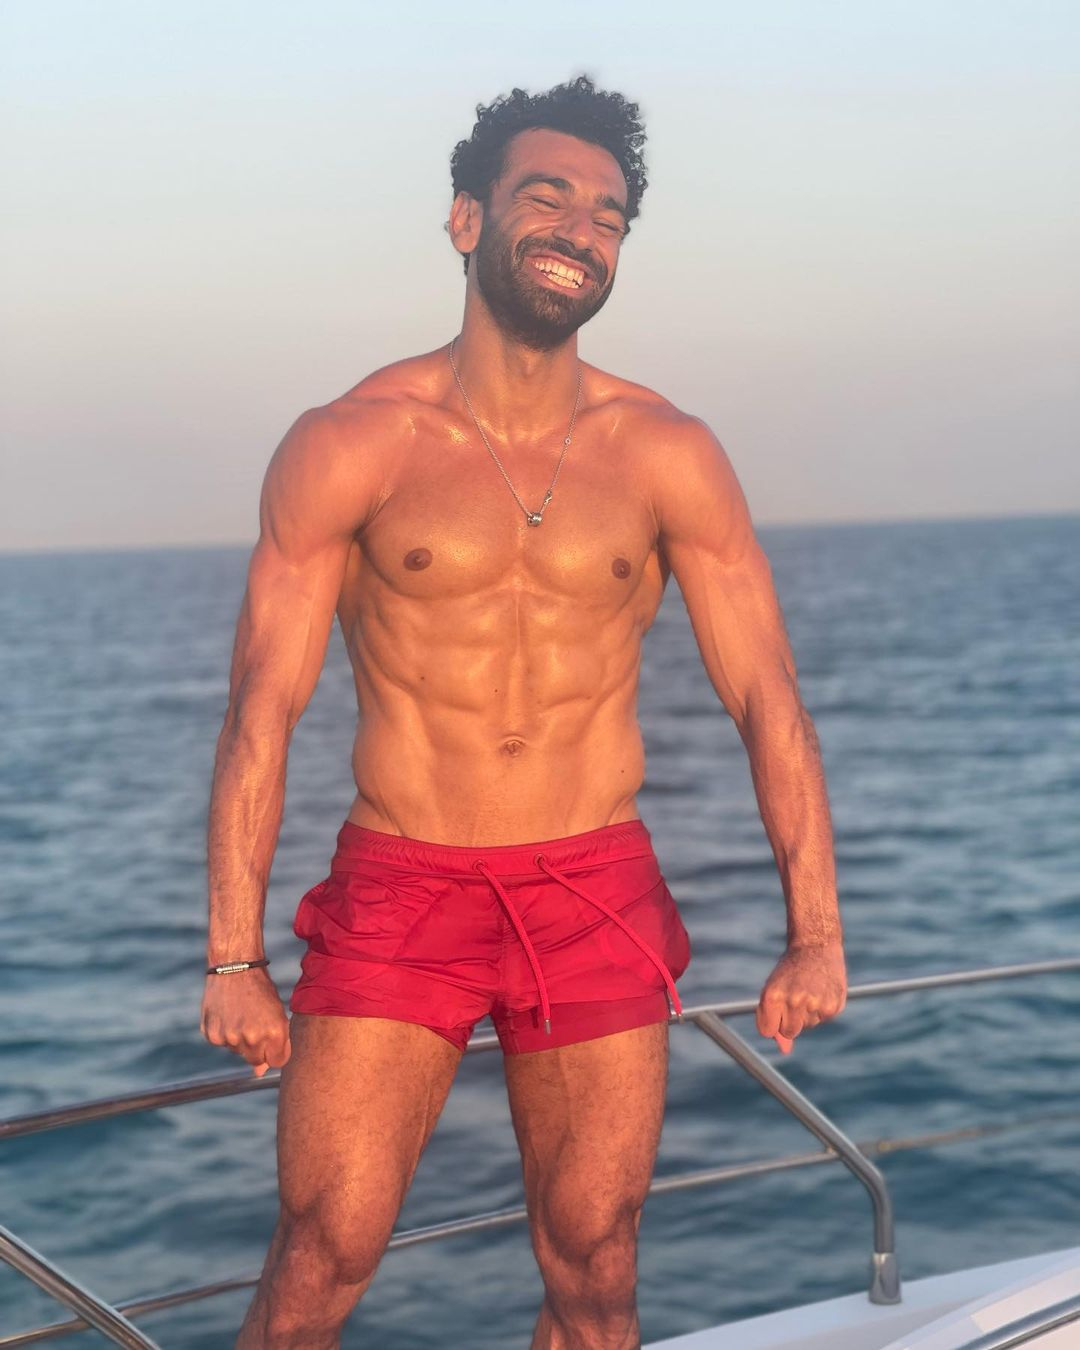 What a beast' - Liverpool star Mo Salah leaves team-mates stunned as he  shows off ripped body on holiday | The Sun